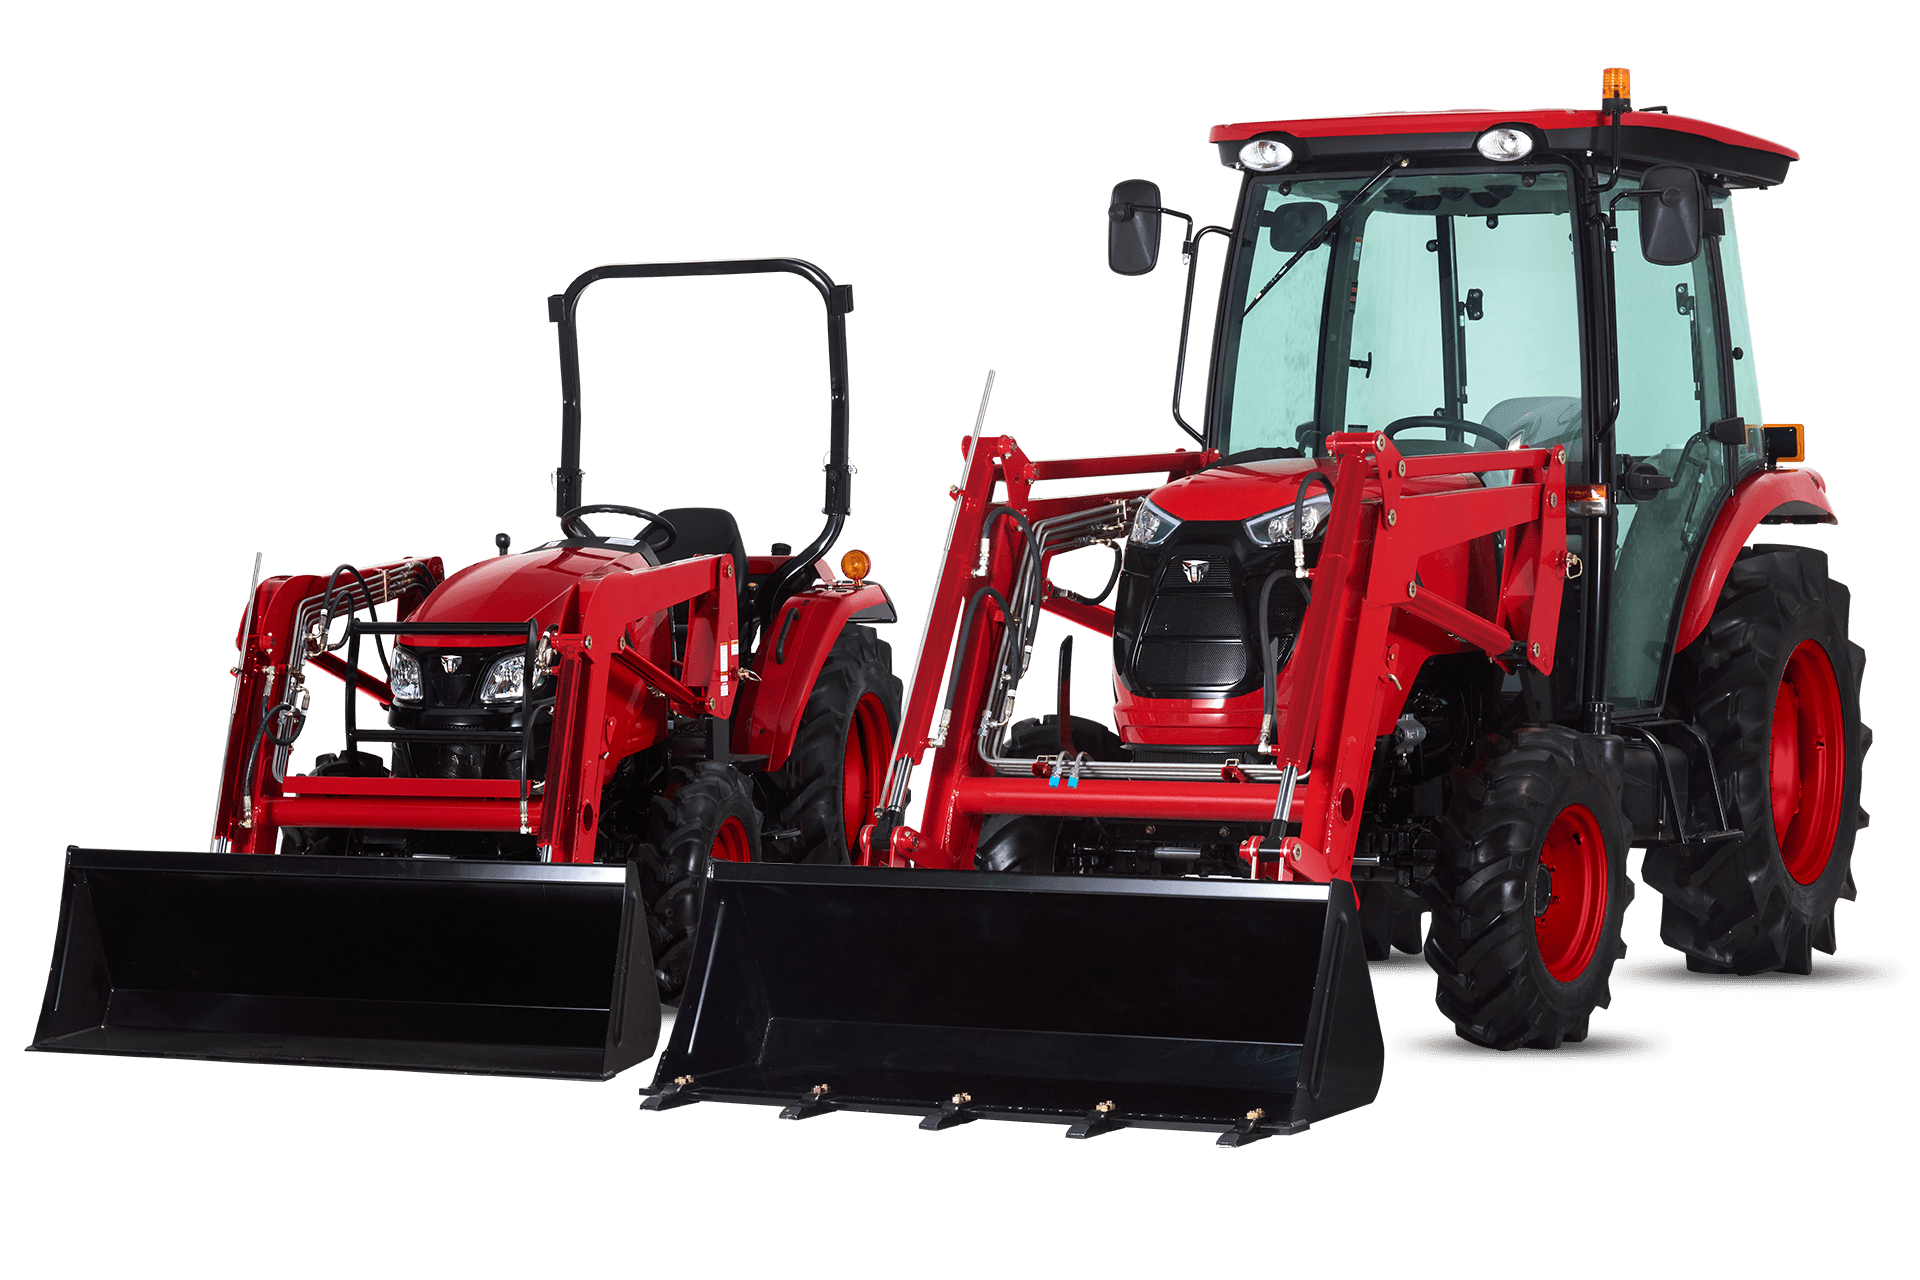 A guide to TYM compact tractors